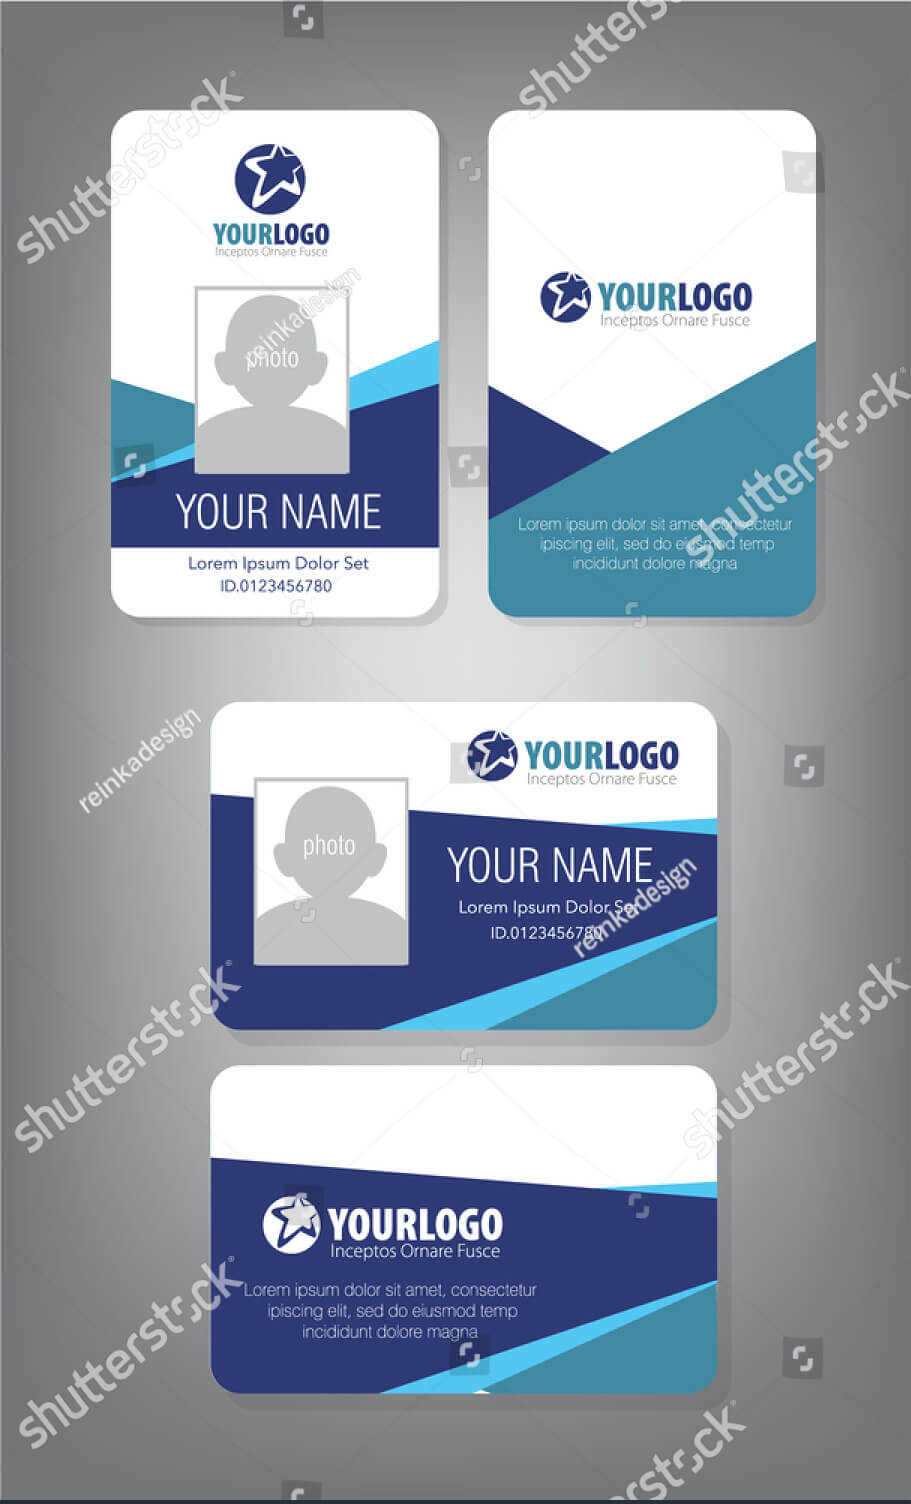 43+ Professional Id Card Designs – Psd, Eps, Ai, Word | Free With Regard To Portrait Id Card Template